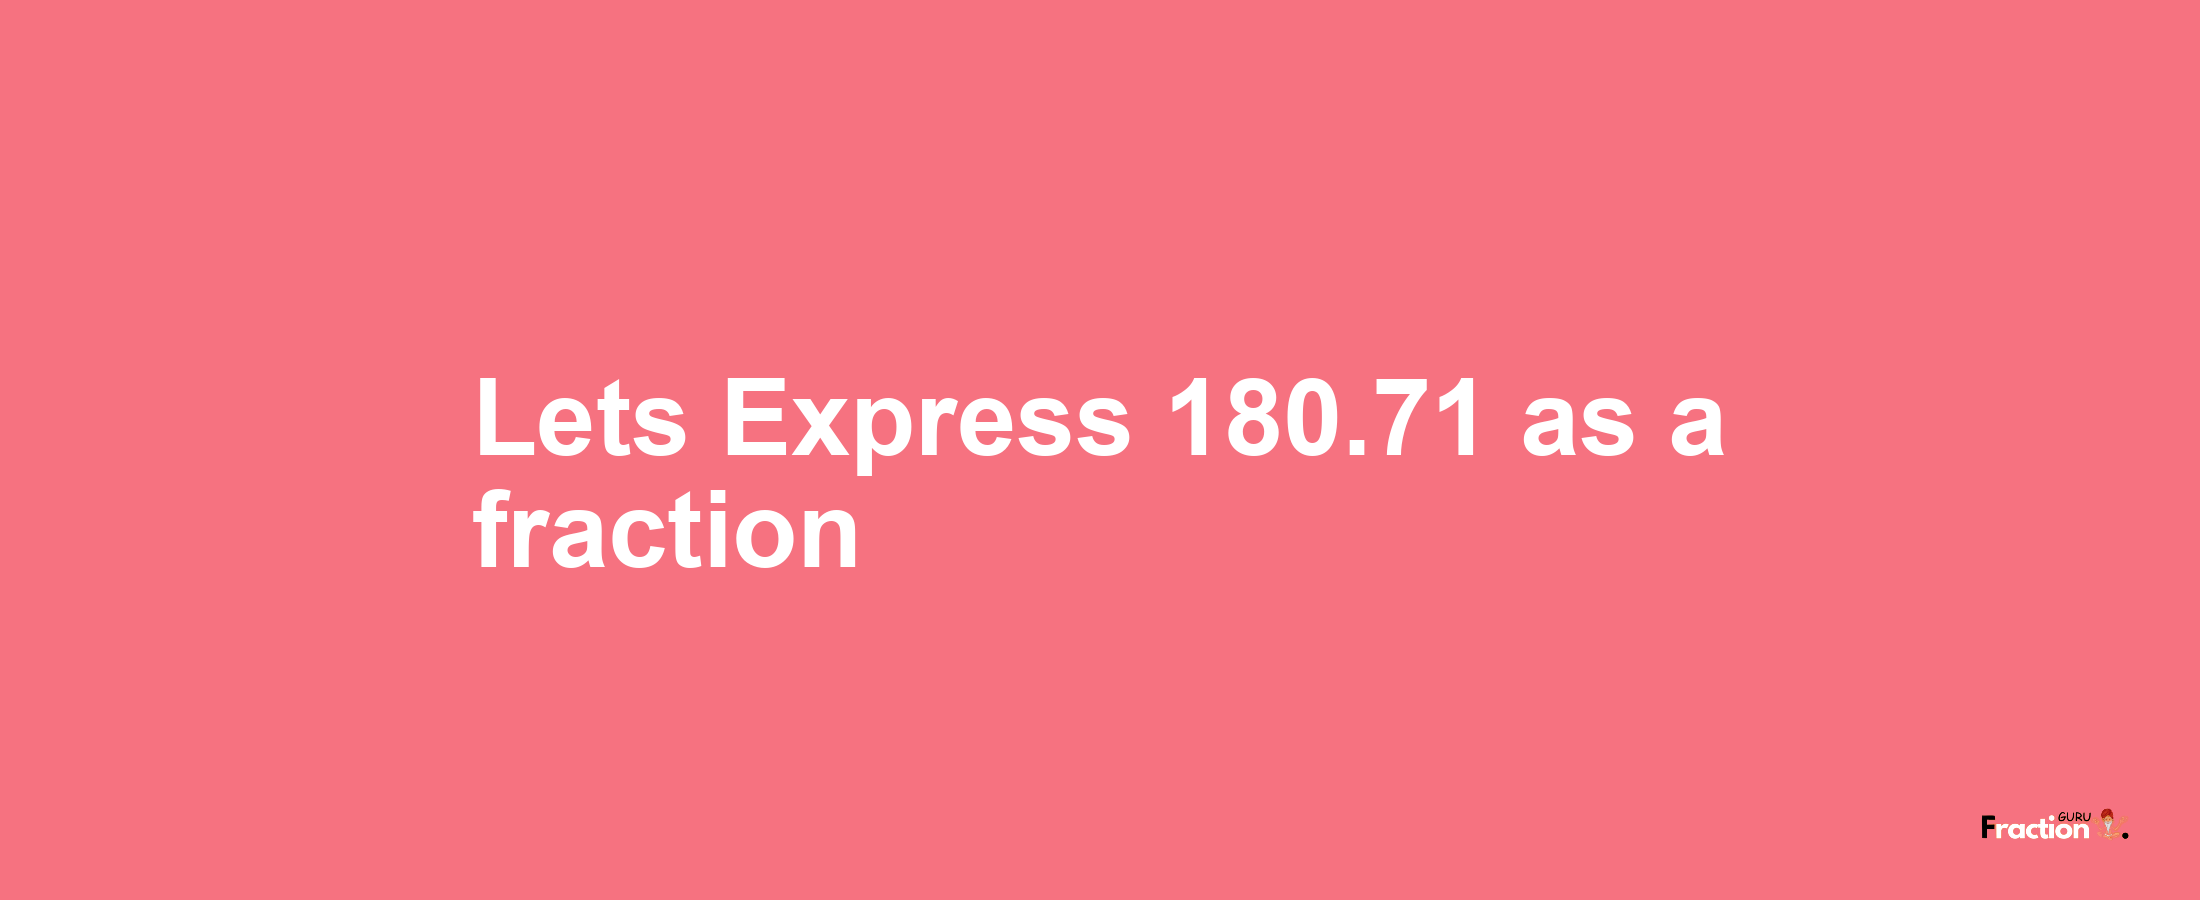 Lets Express 180.71 as afraction